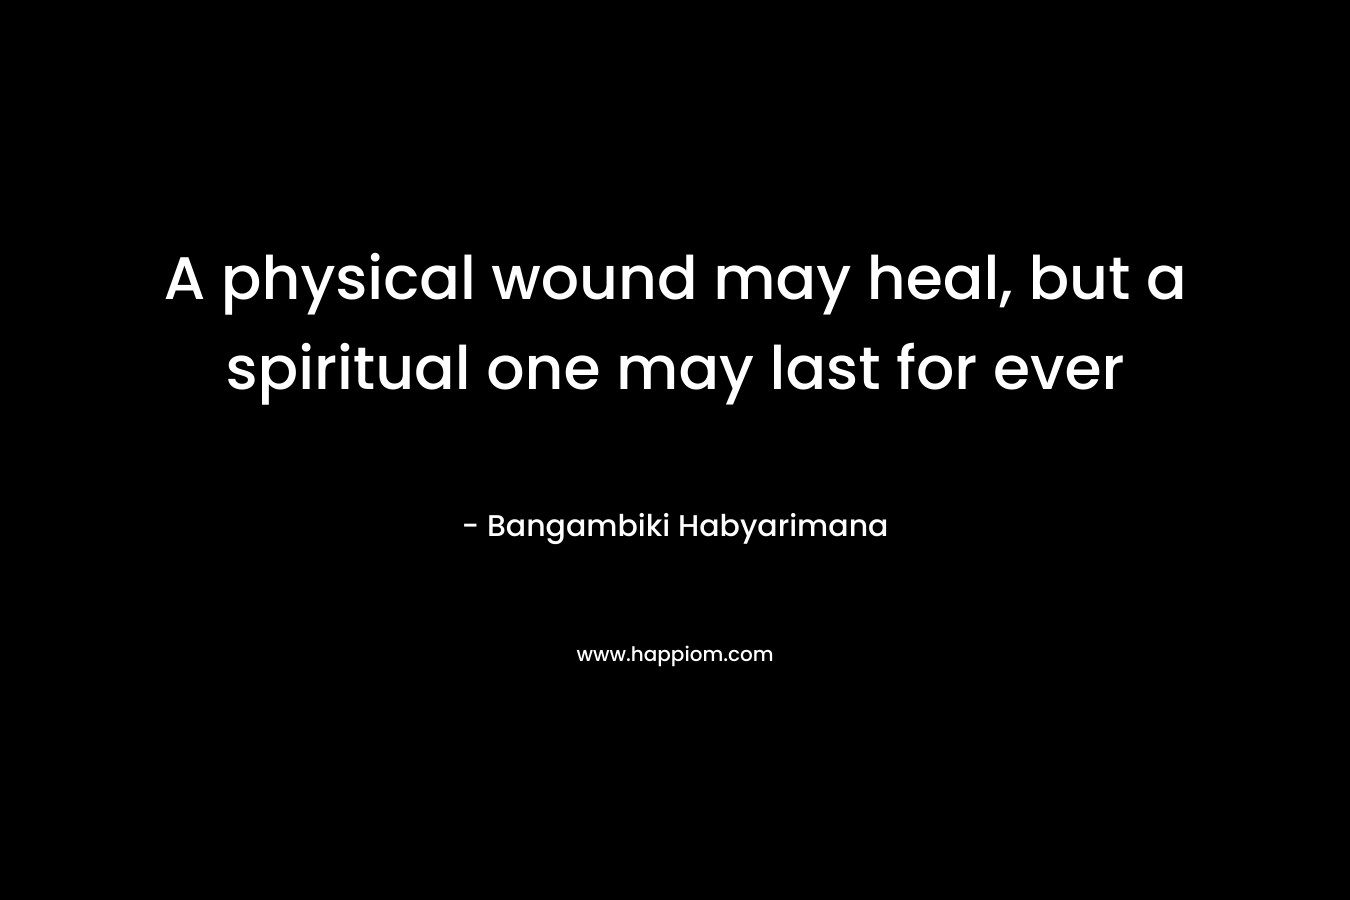 A physical wound may heal, but a spiritual one may last for ever